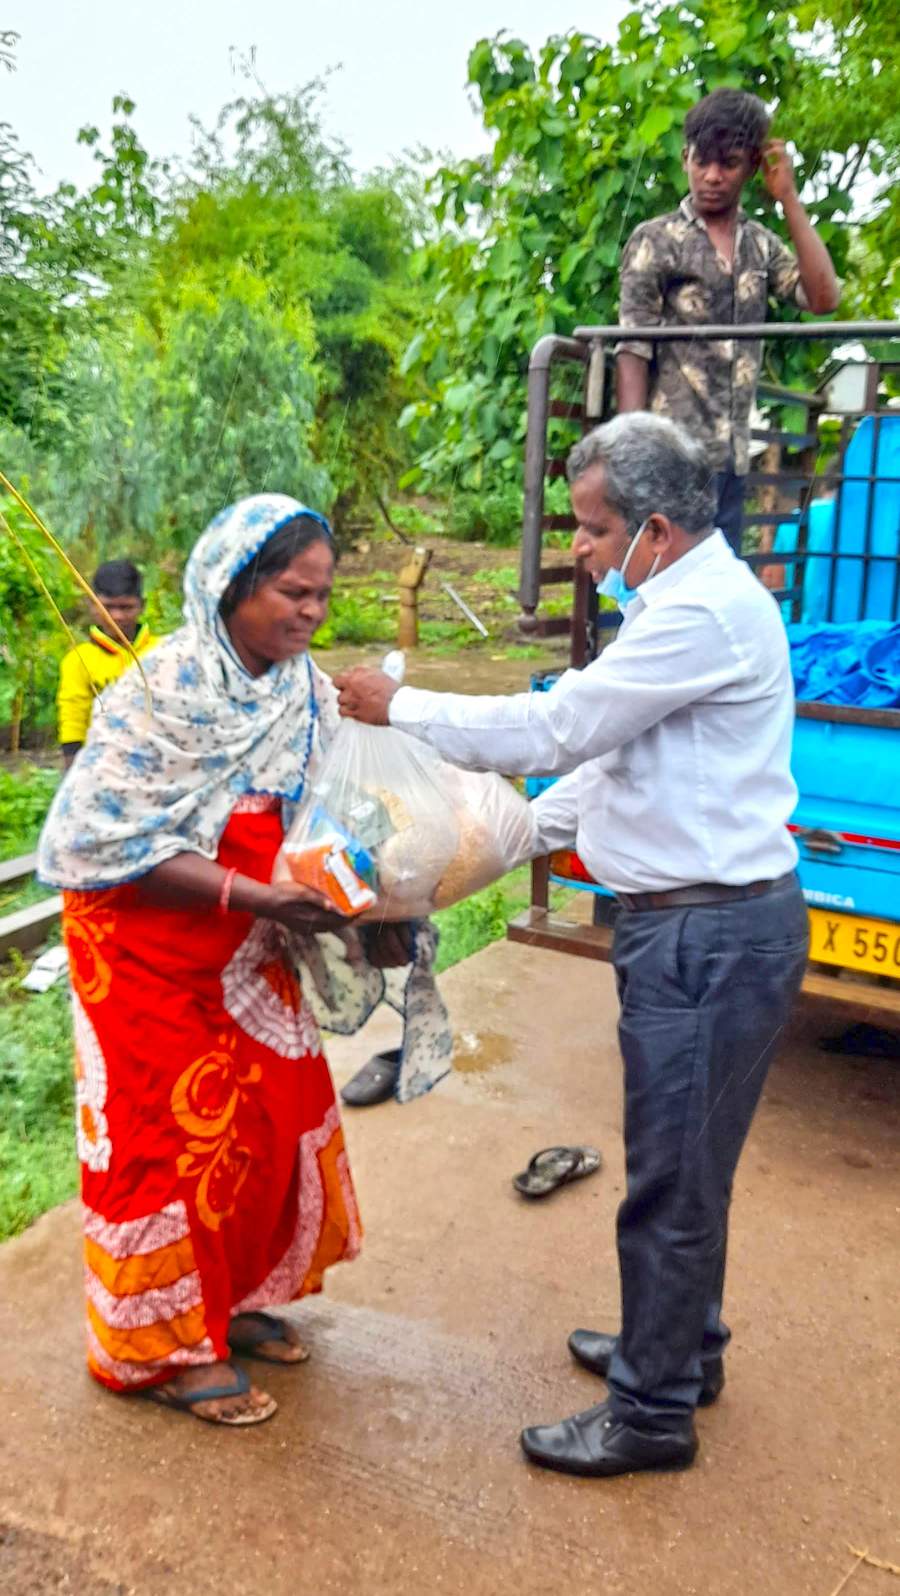 A pastor in  Gujarat distributes food during COVID. Christians are a small minority in Gujarat but take the lead in showing care for those in need.